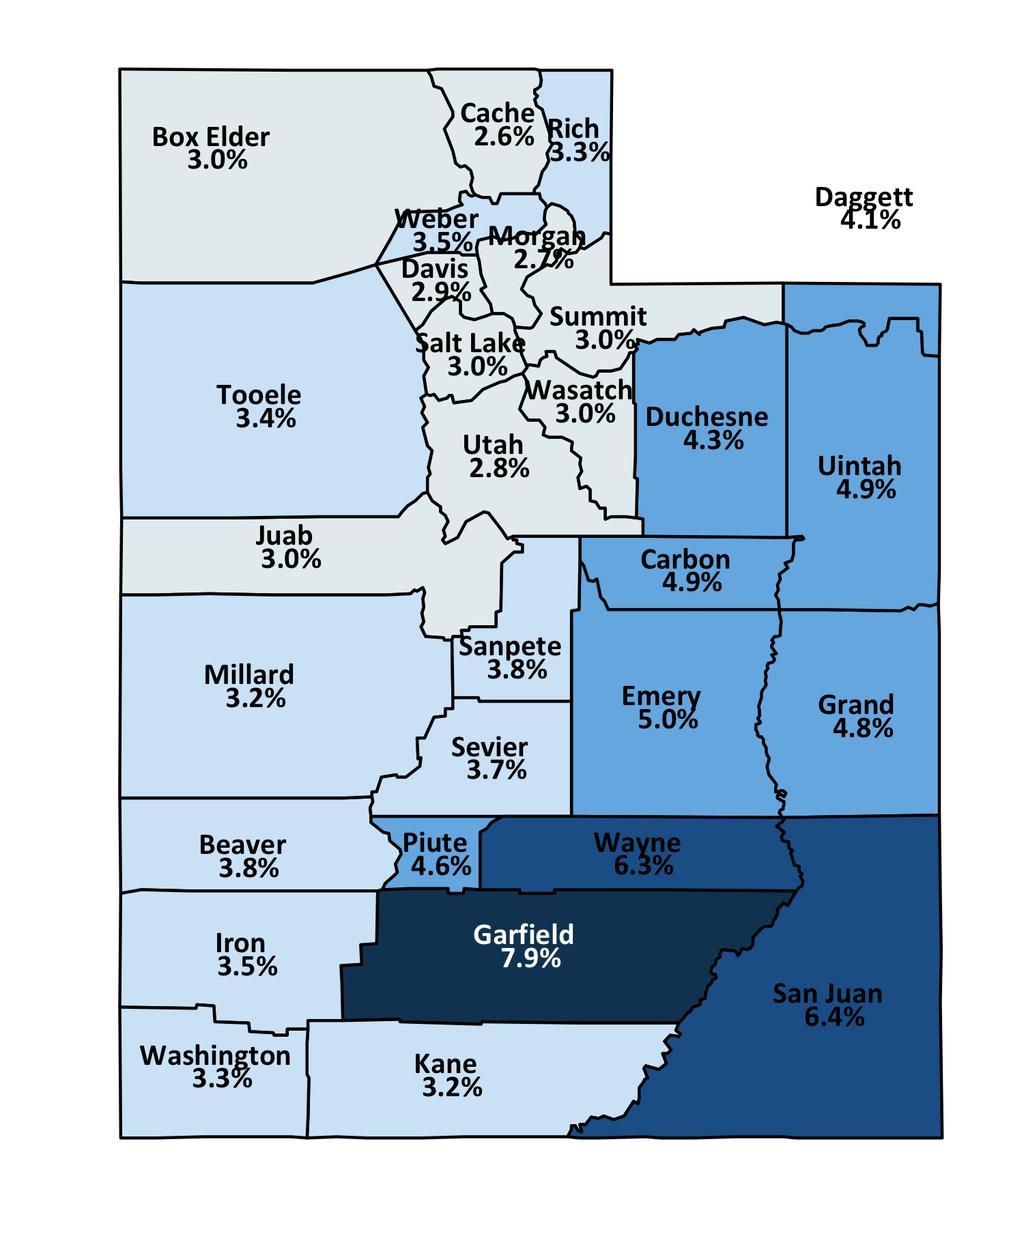 Utah Unemployment Rates By County February 2018 State Rate = 3.1% 7.0% + 6.0% to 6.